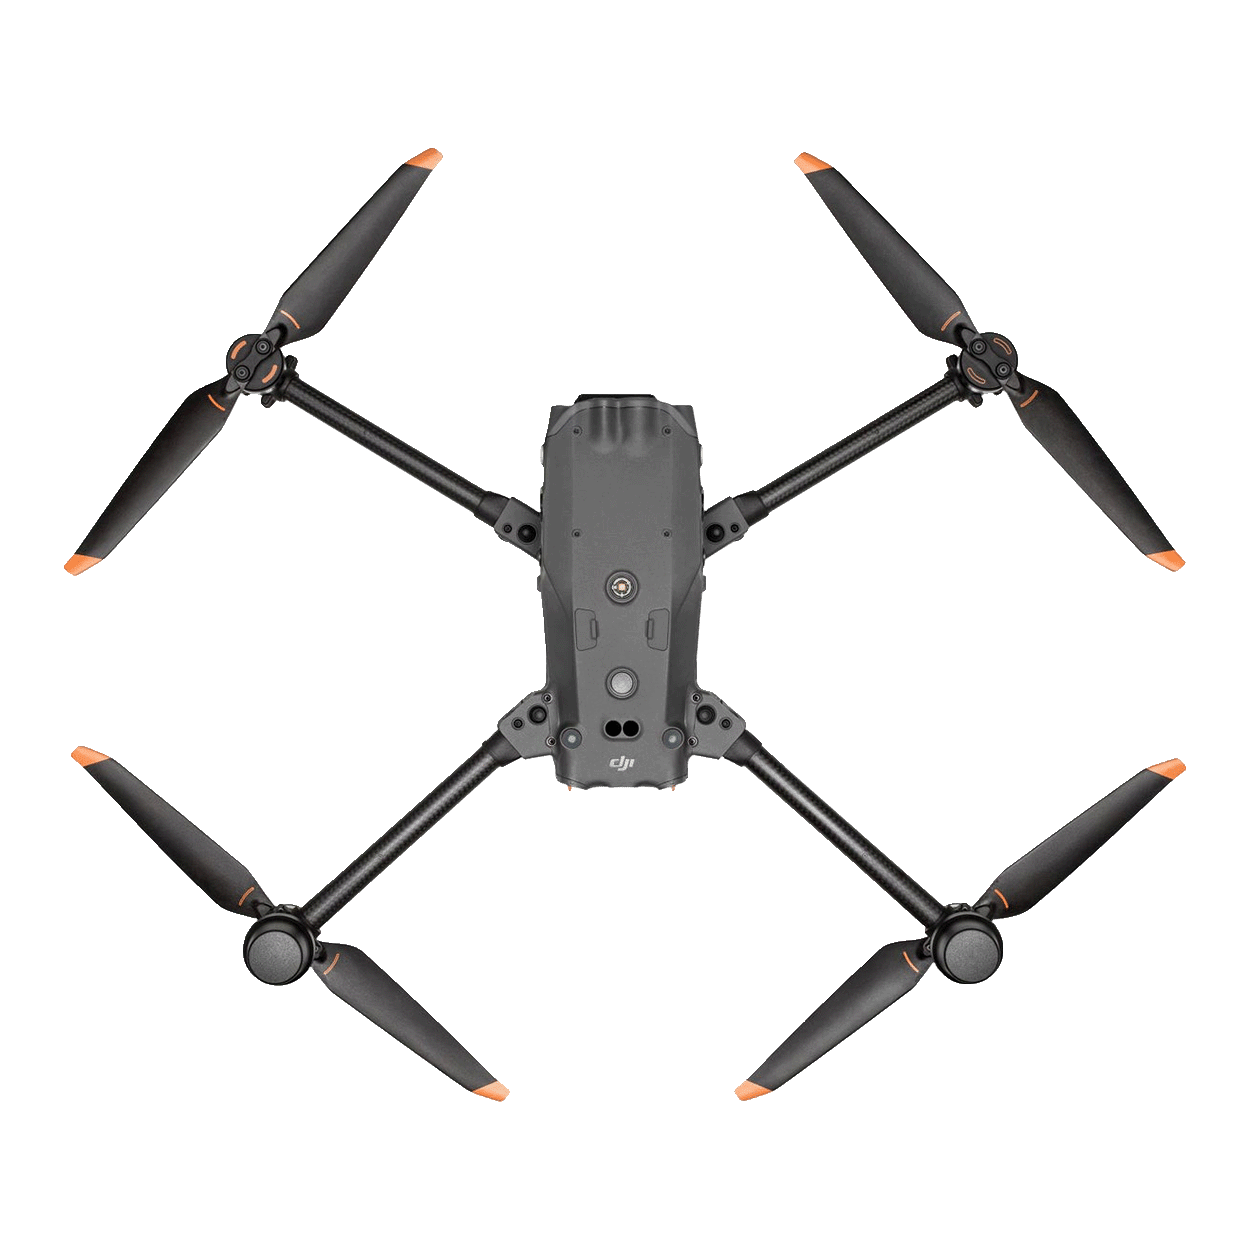 DJI Matrice M30 - industrial for professional UAS operations